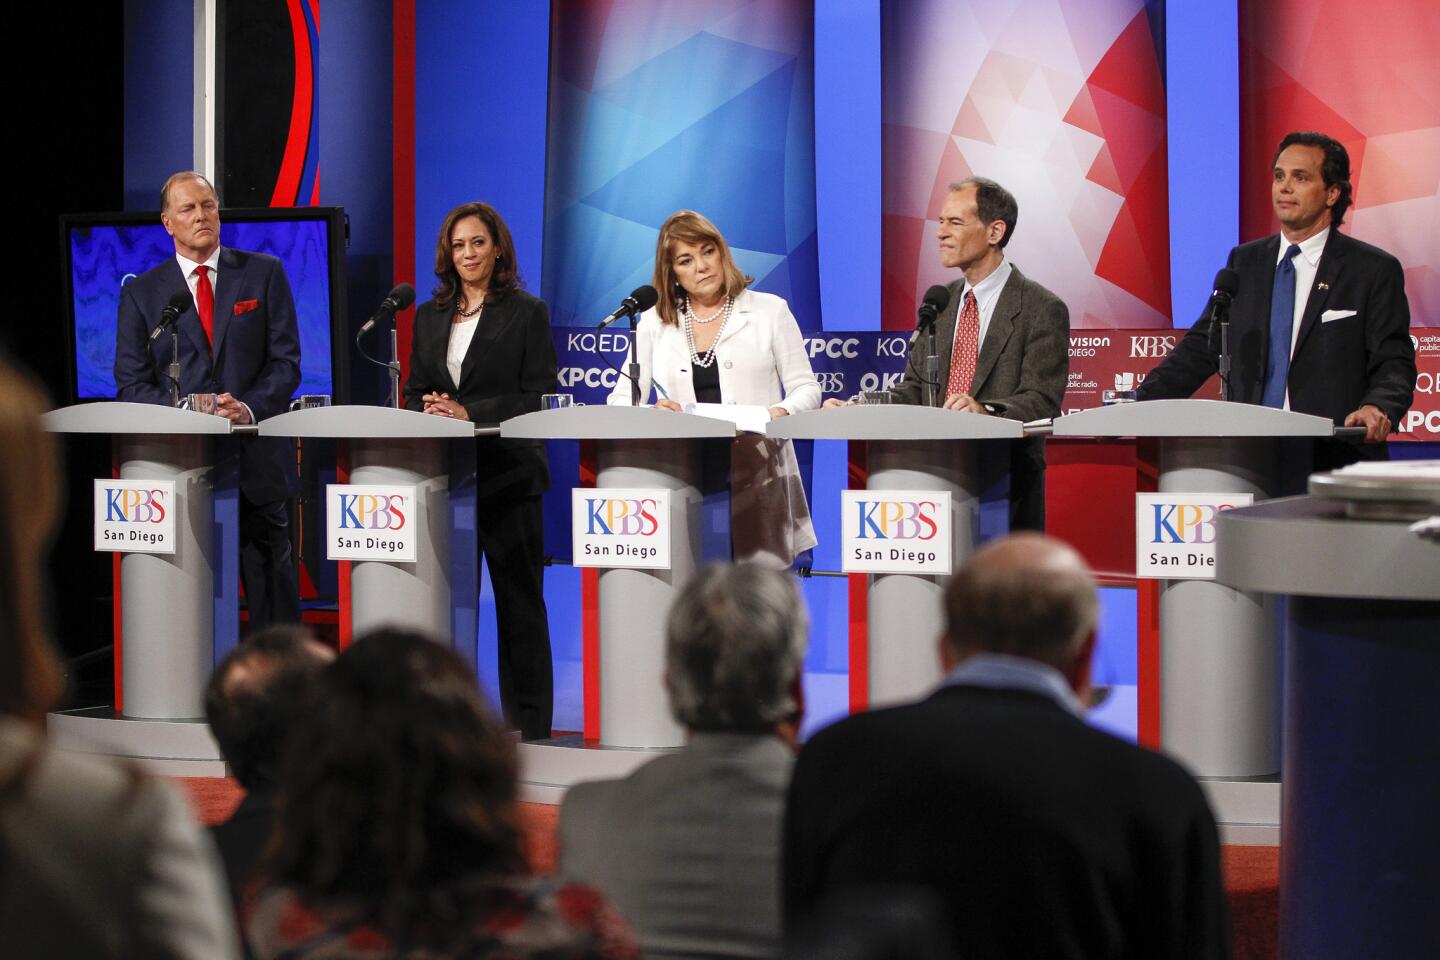 The top five candidates running to replace retiring Sen. Barbara Boxer, from left, George "Duf" Sundheim, Kamala Harris, Loretta Sanchez, Ron Unz and Tom Del Beccaro, stand on stage as they debate in San Diego on May 10.